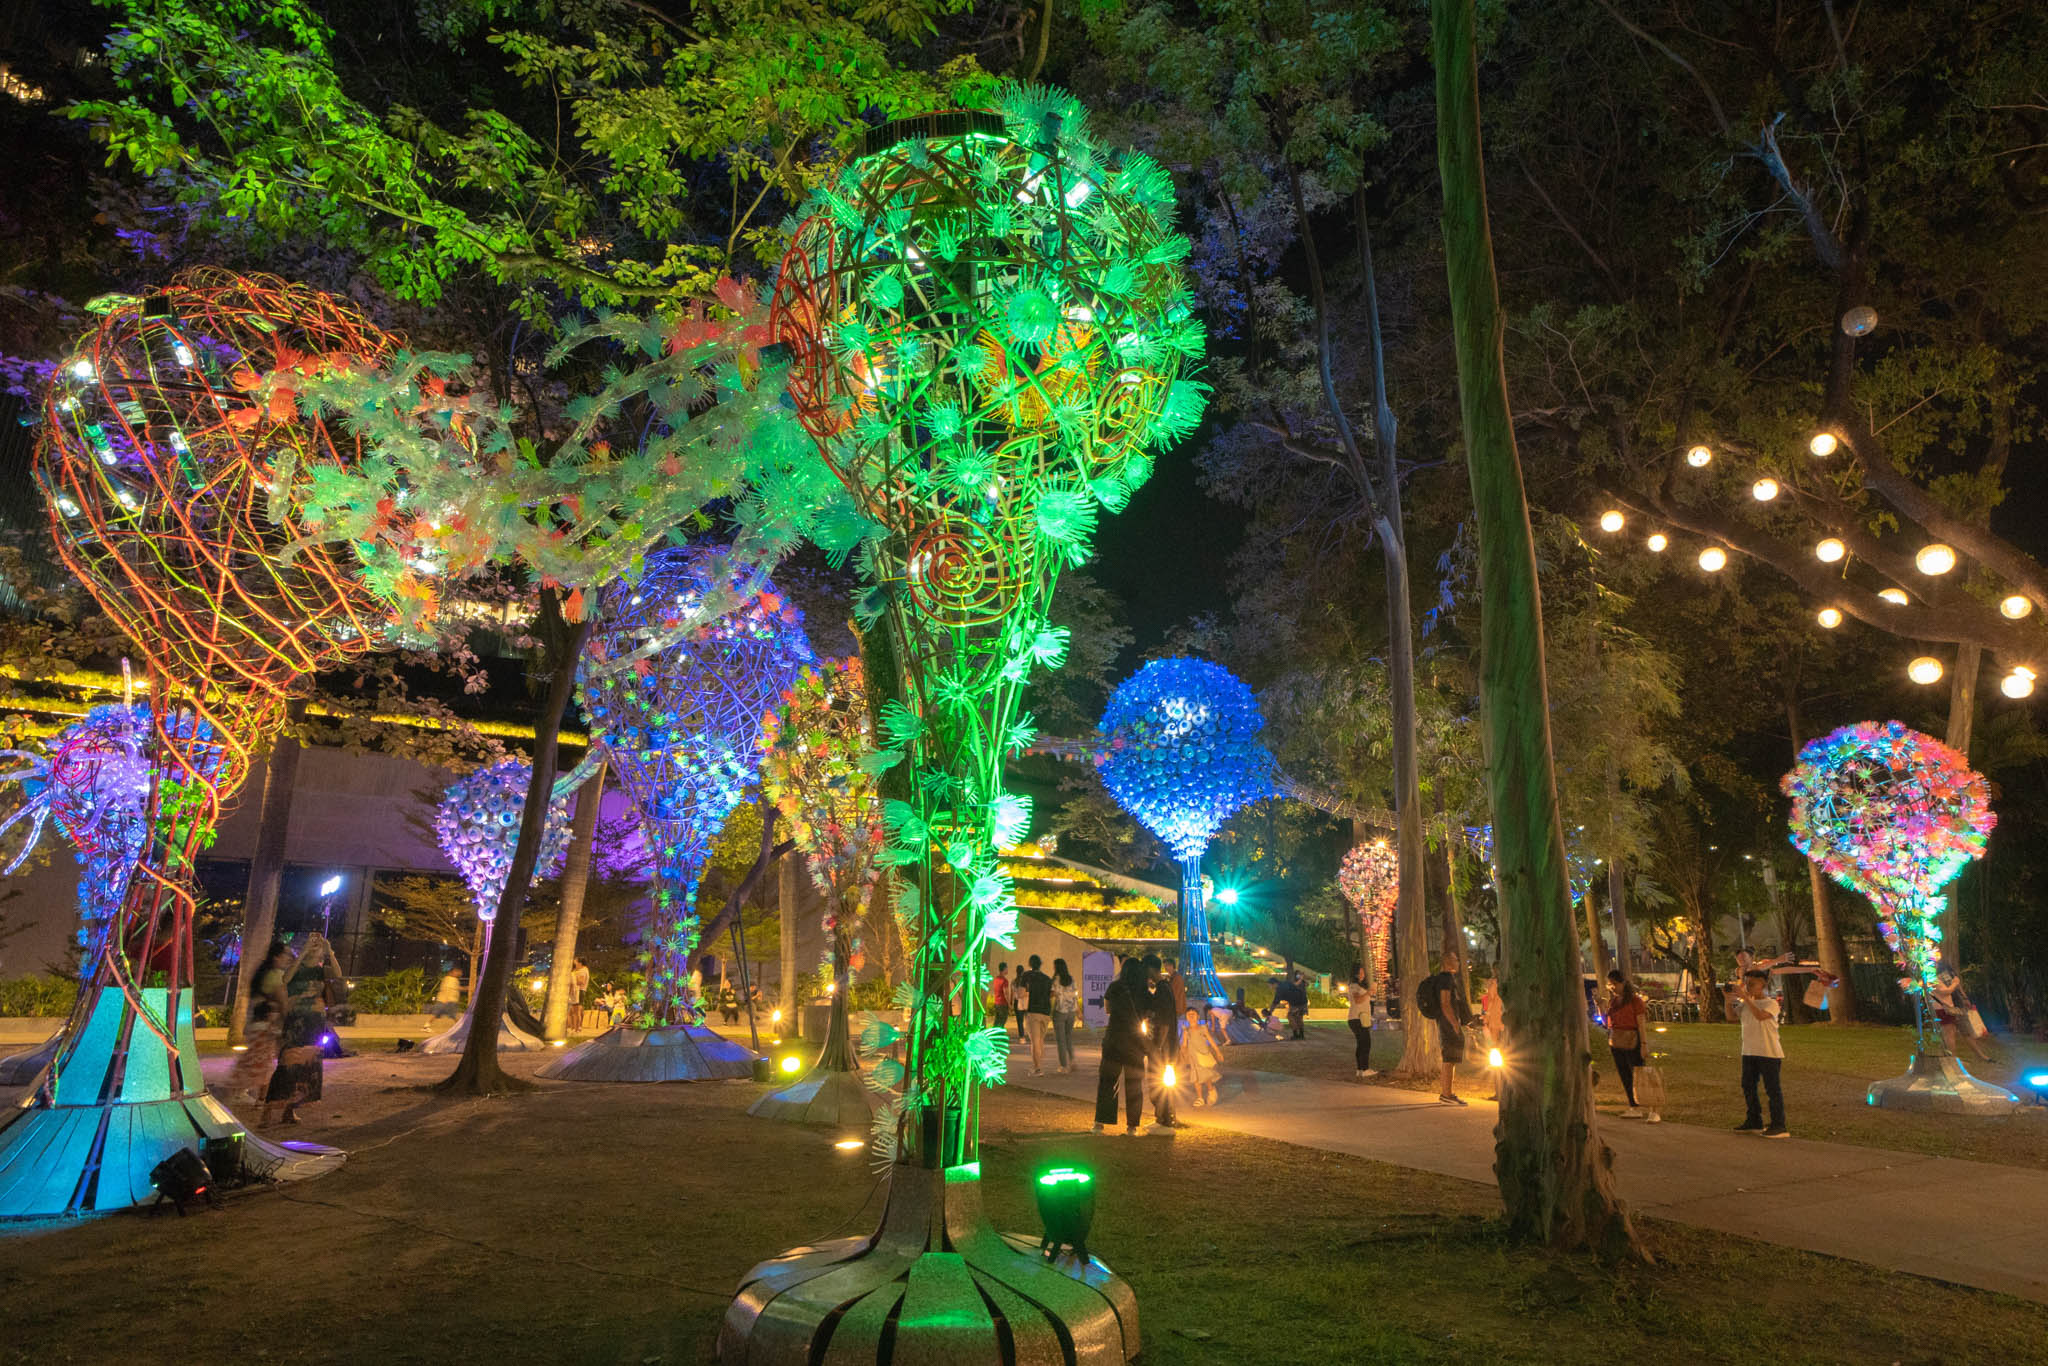 Leeroy New's Elemental art installation at night lit by sustainable lighting